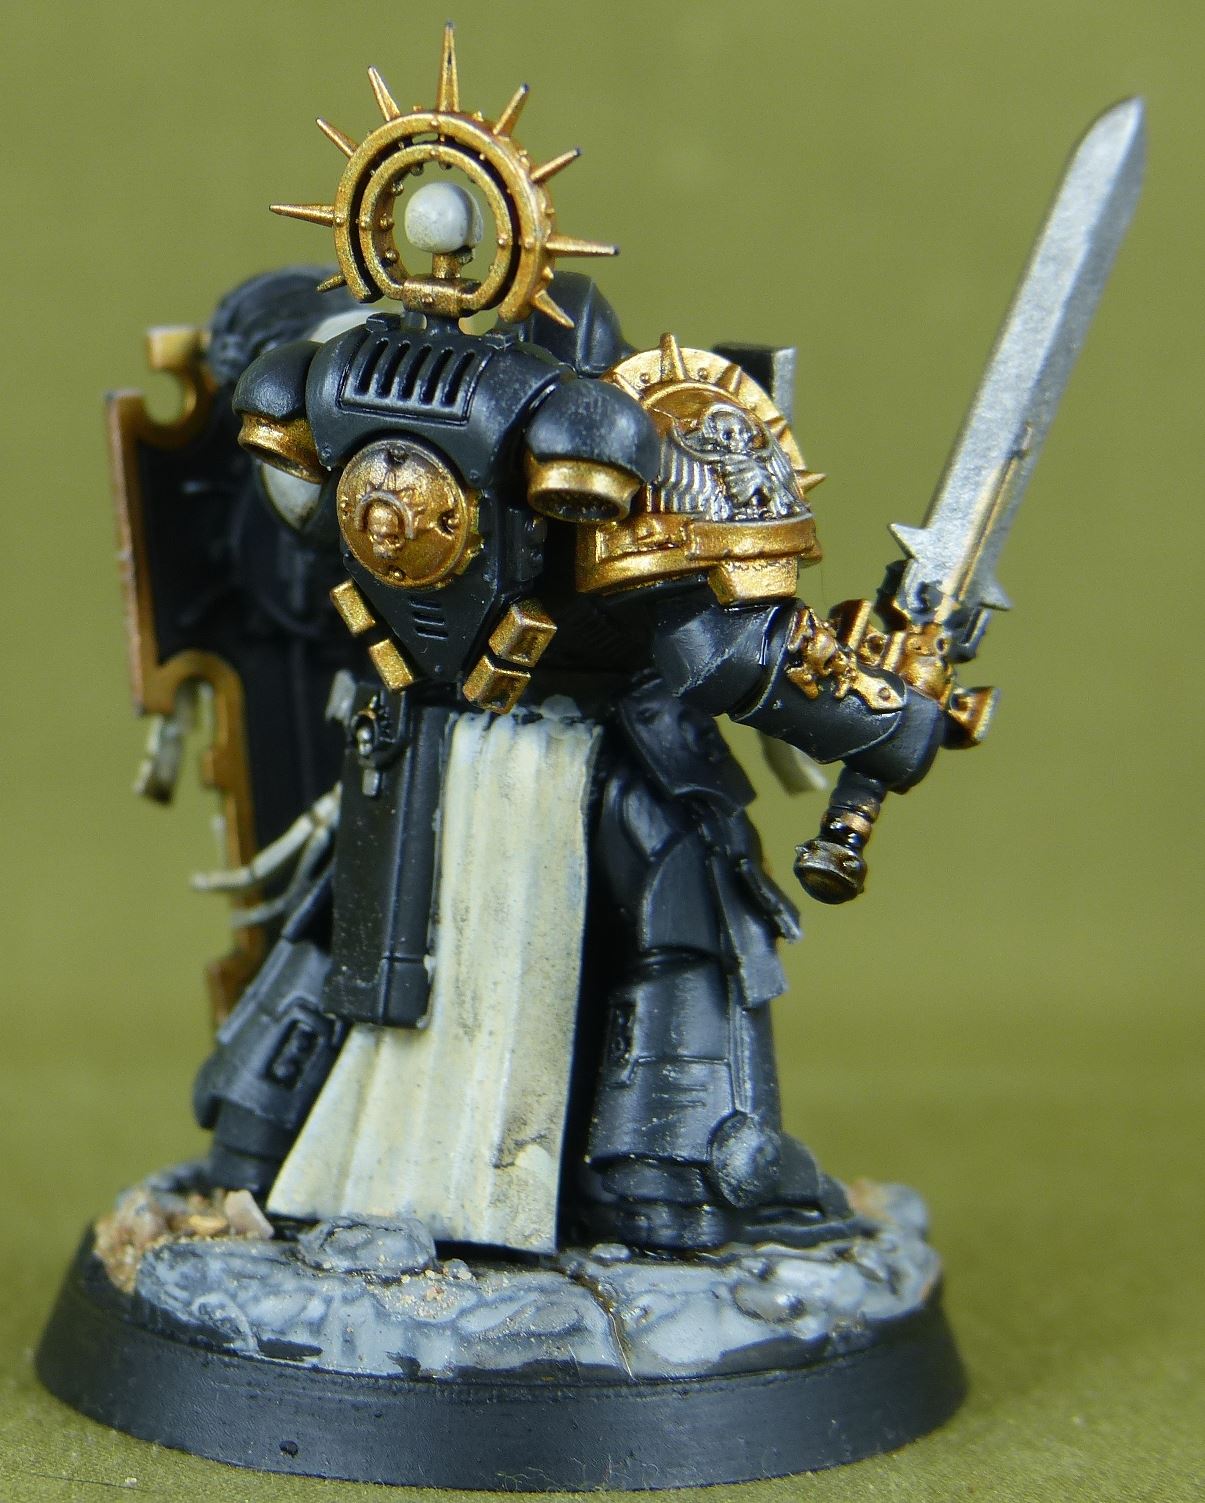 Captain with relic shield - Black Templars - Painted - Warhammer AoS 40k #1W7